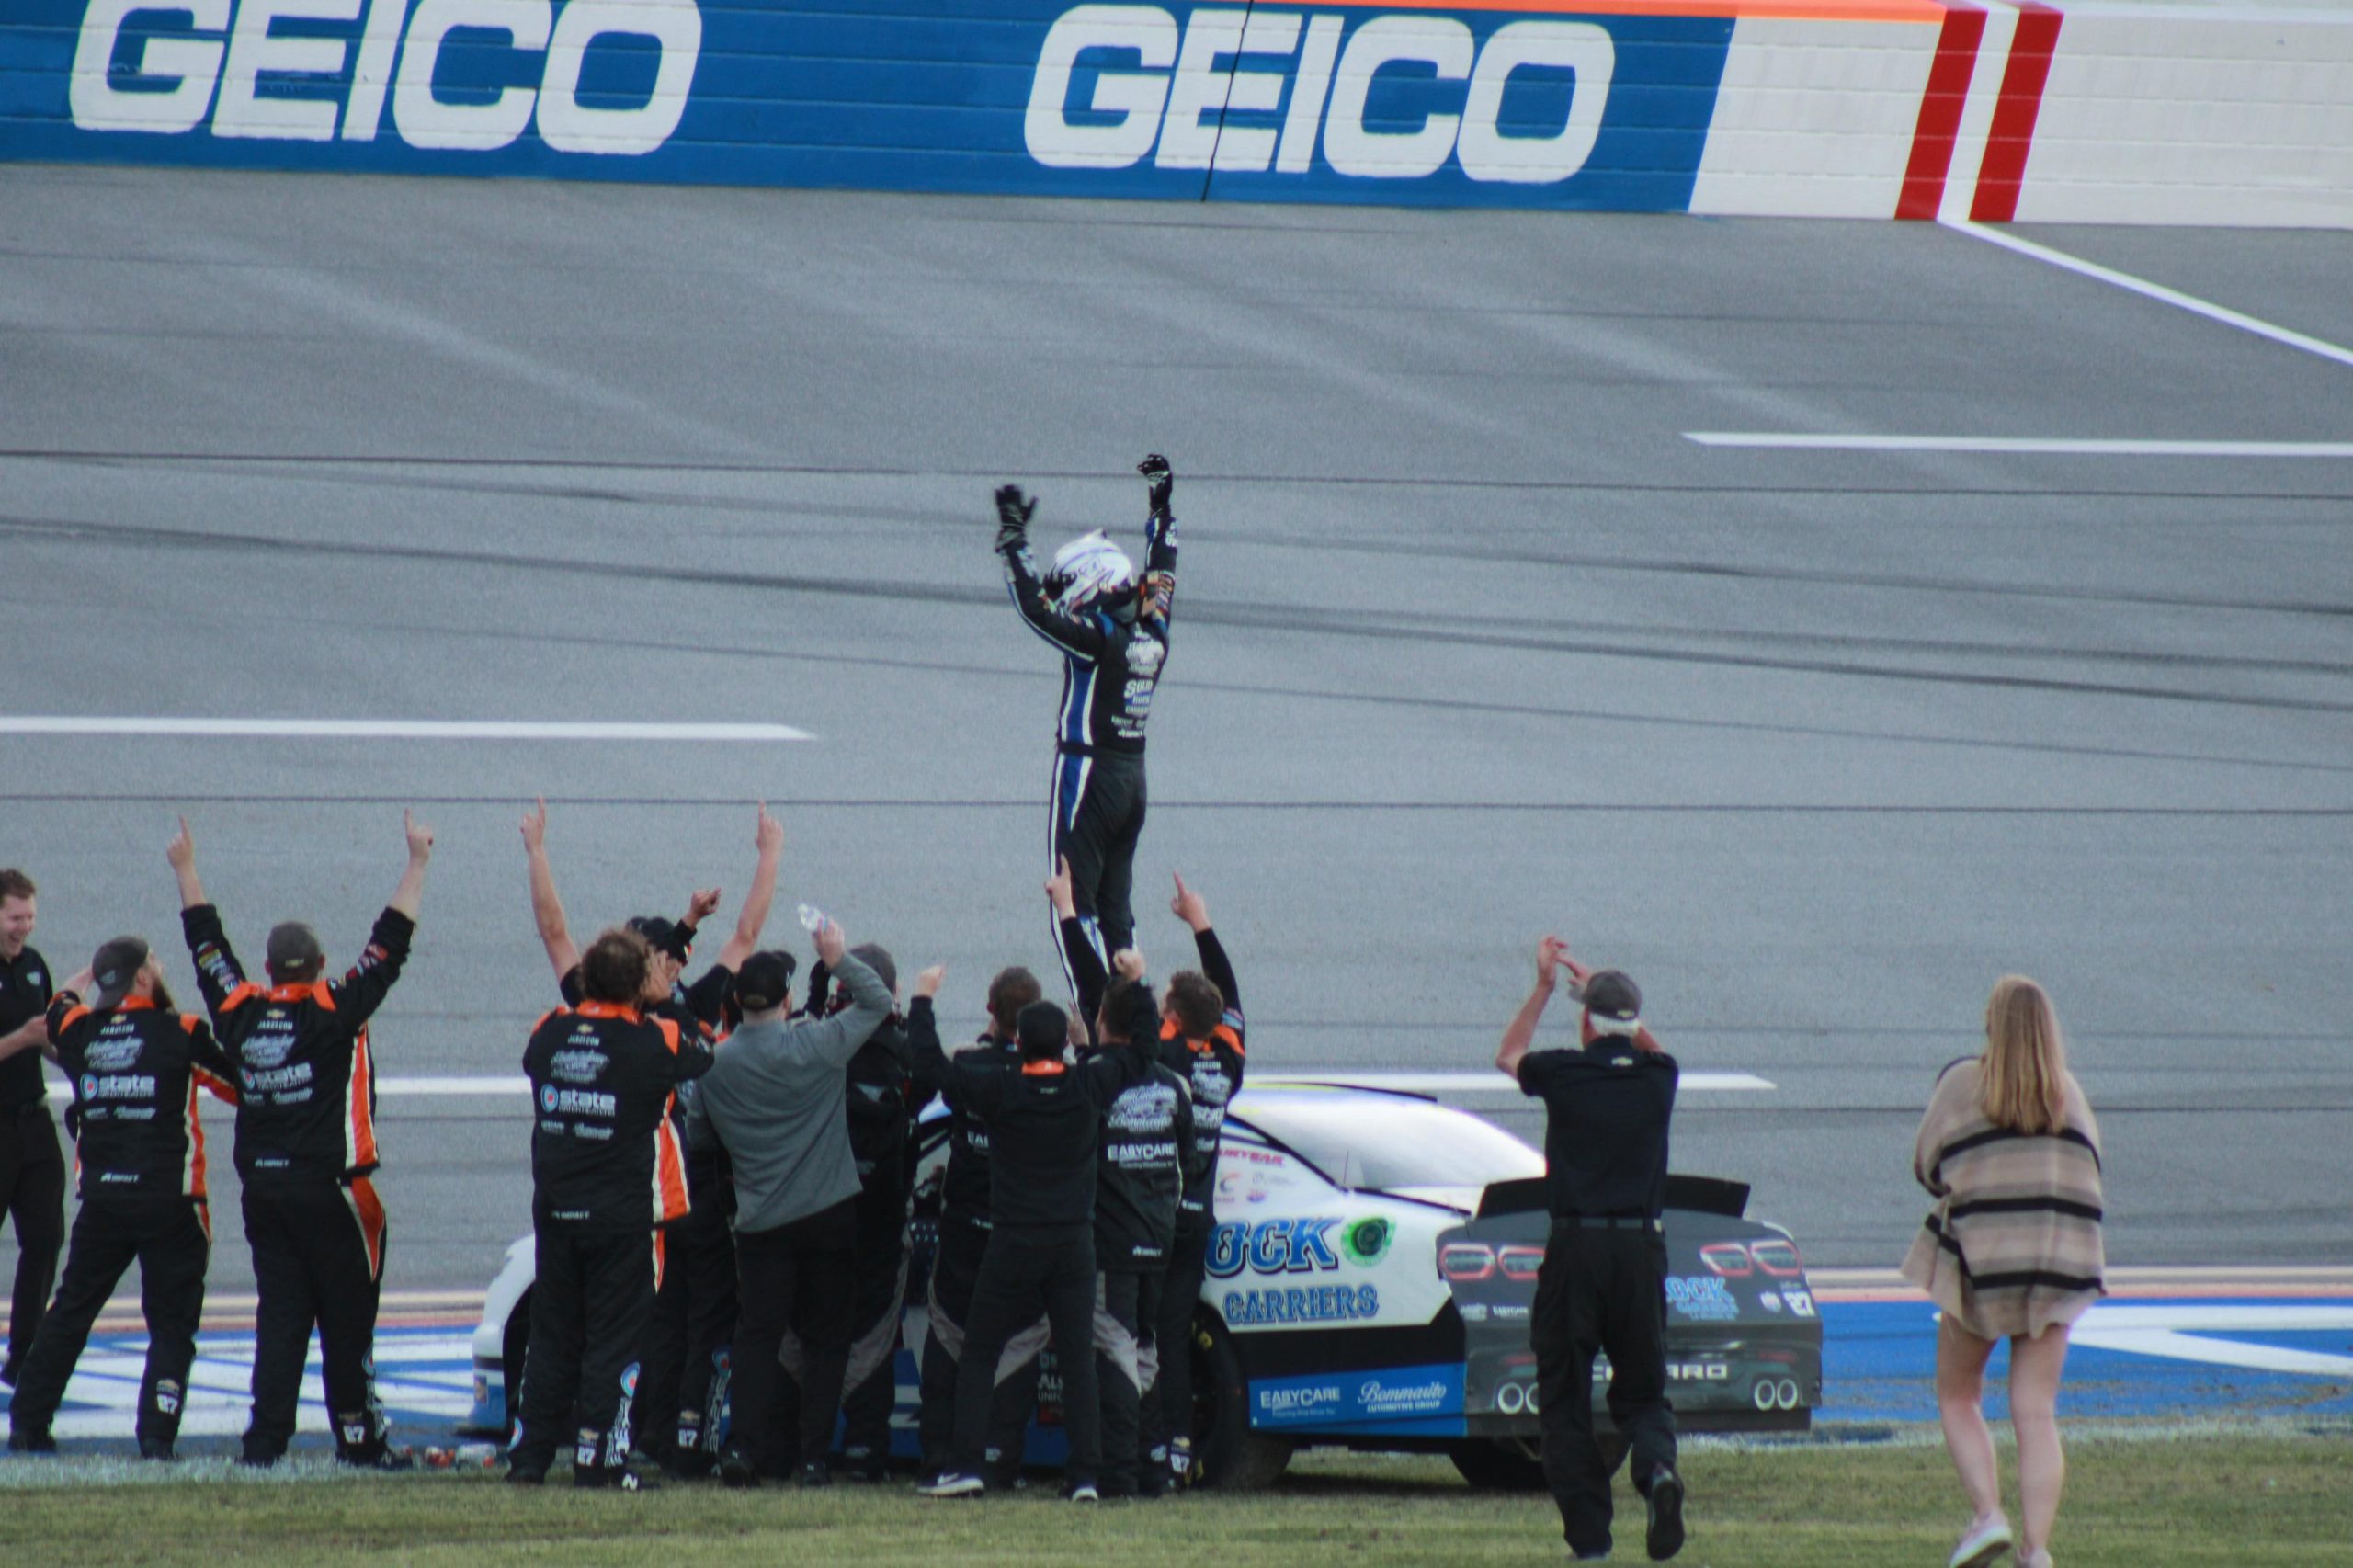 It was arms raised in victory for Burton with his No. 27 team. (Photo: Trish McCormack | The Podium Finish)